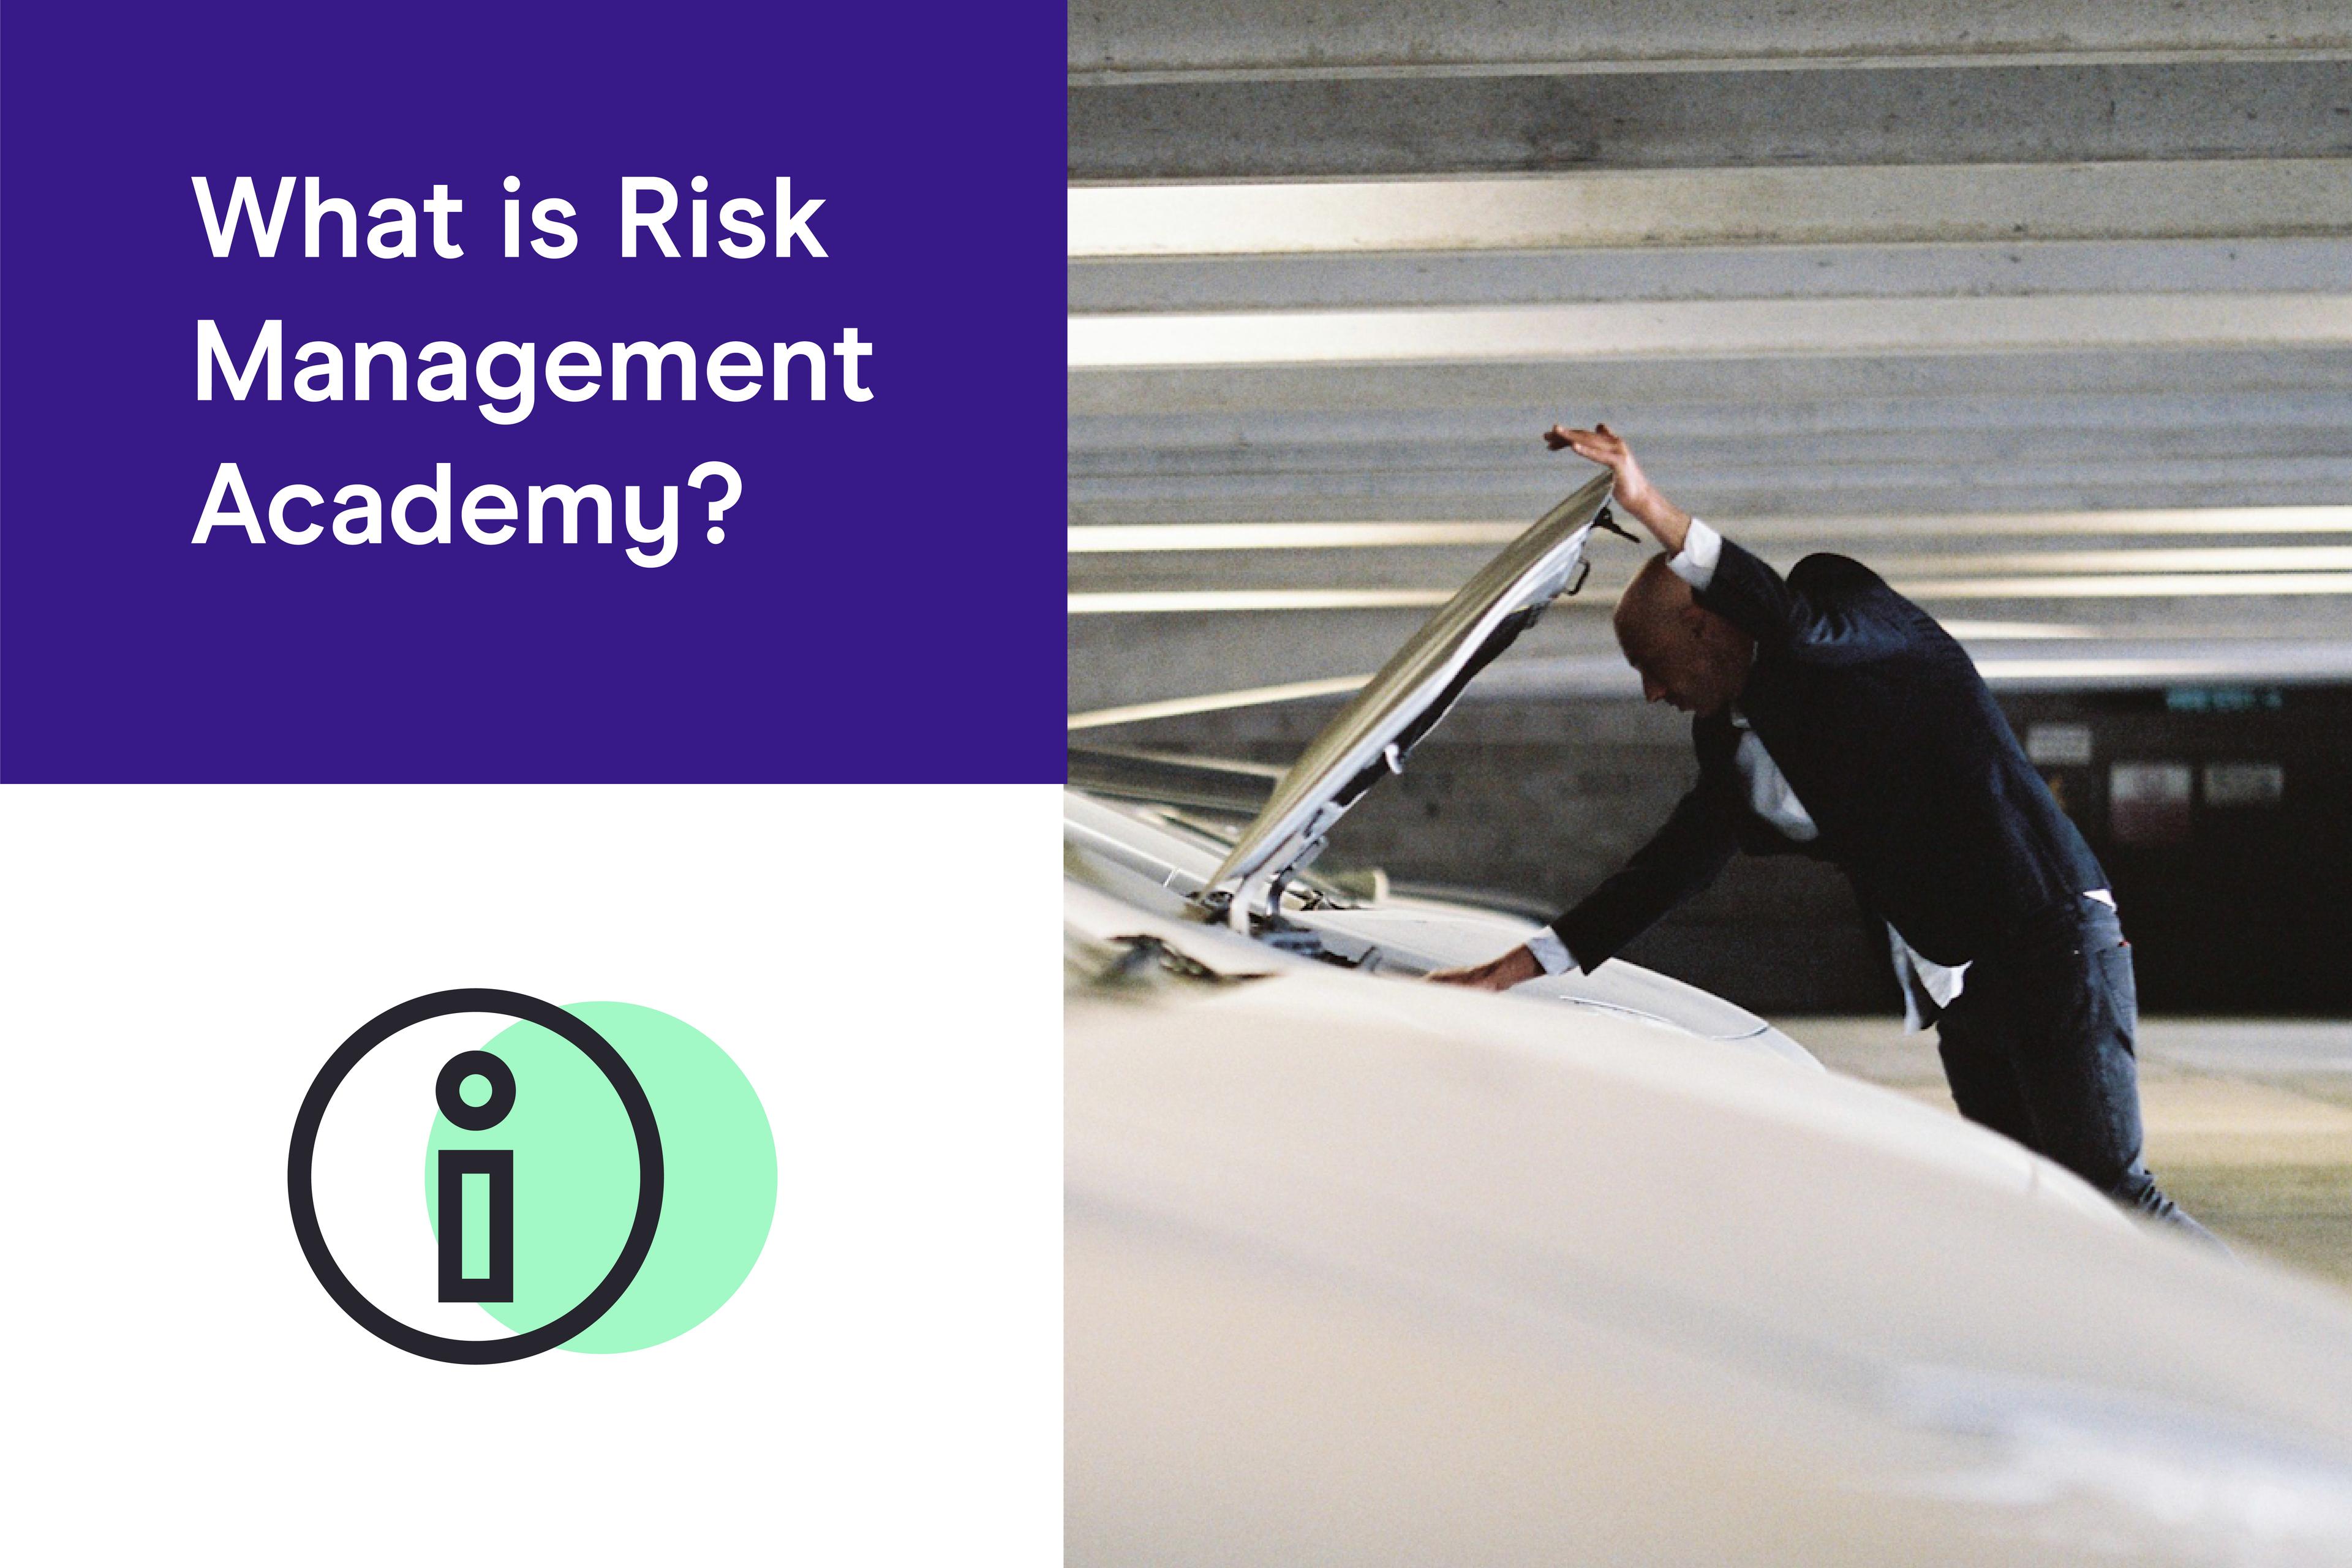 What is the Risk Management Academy?